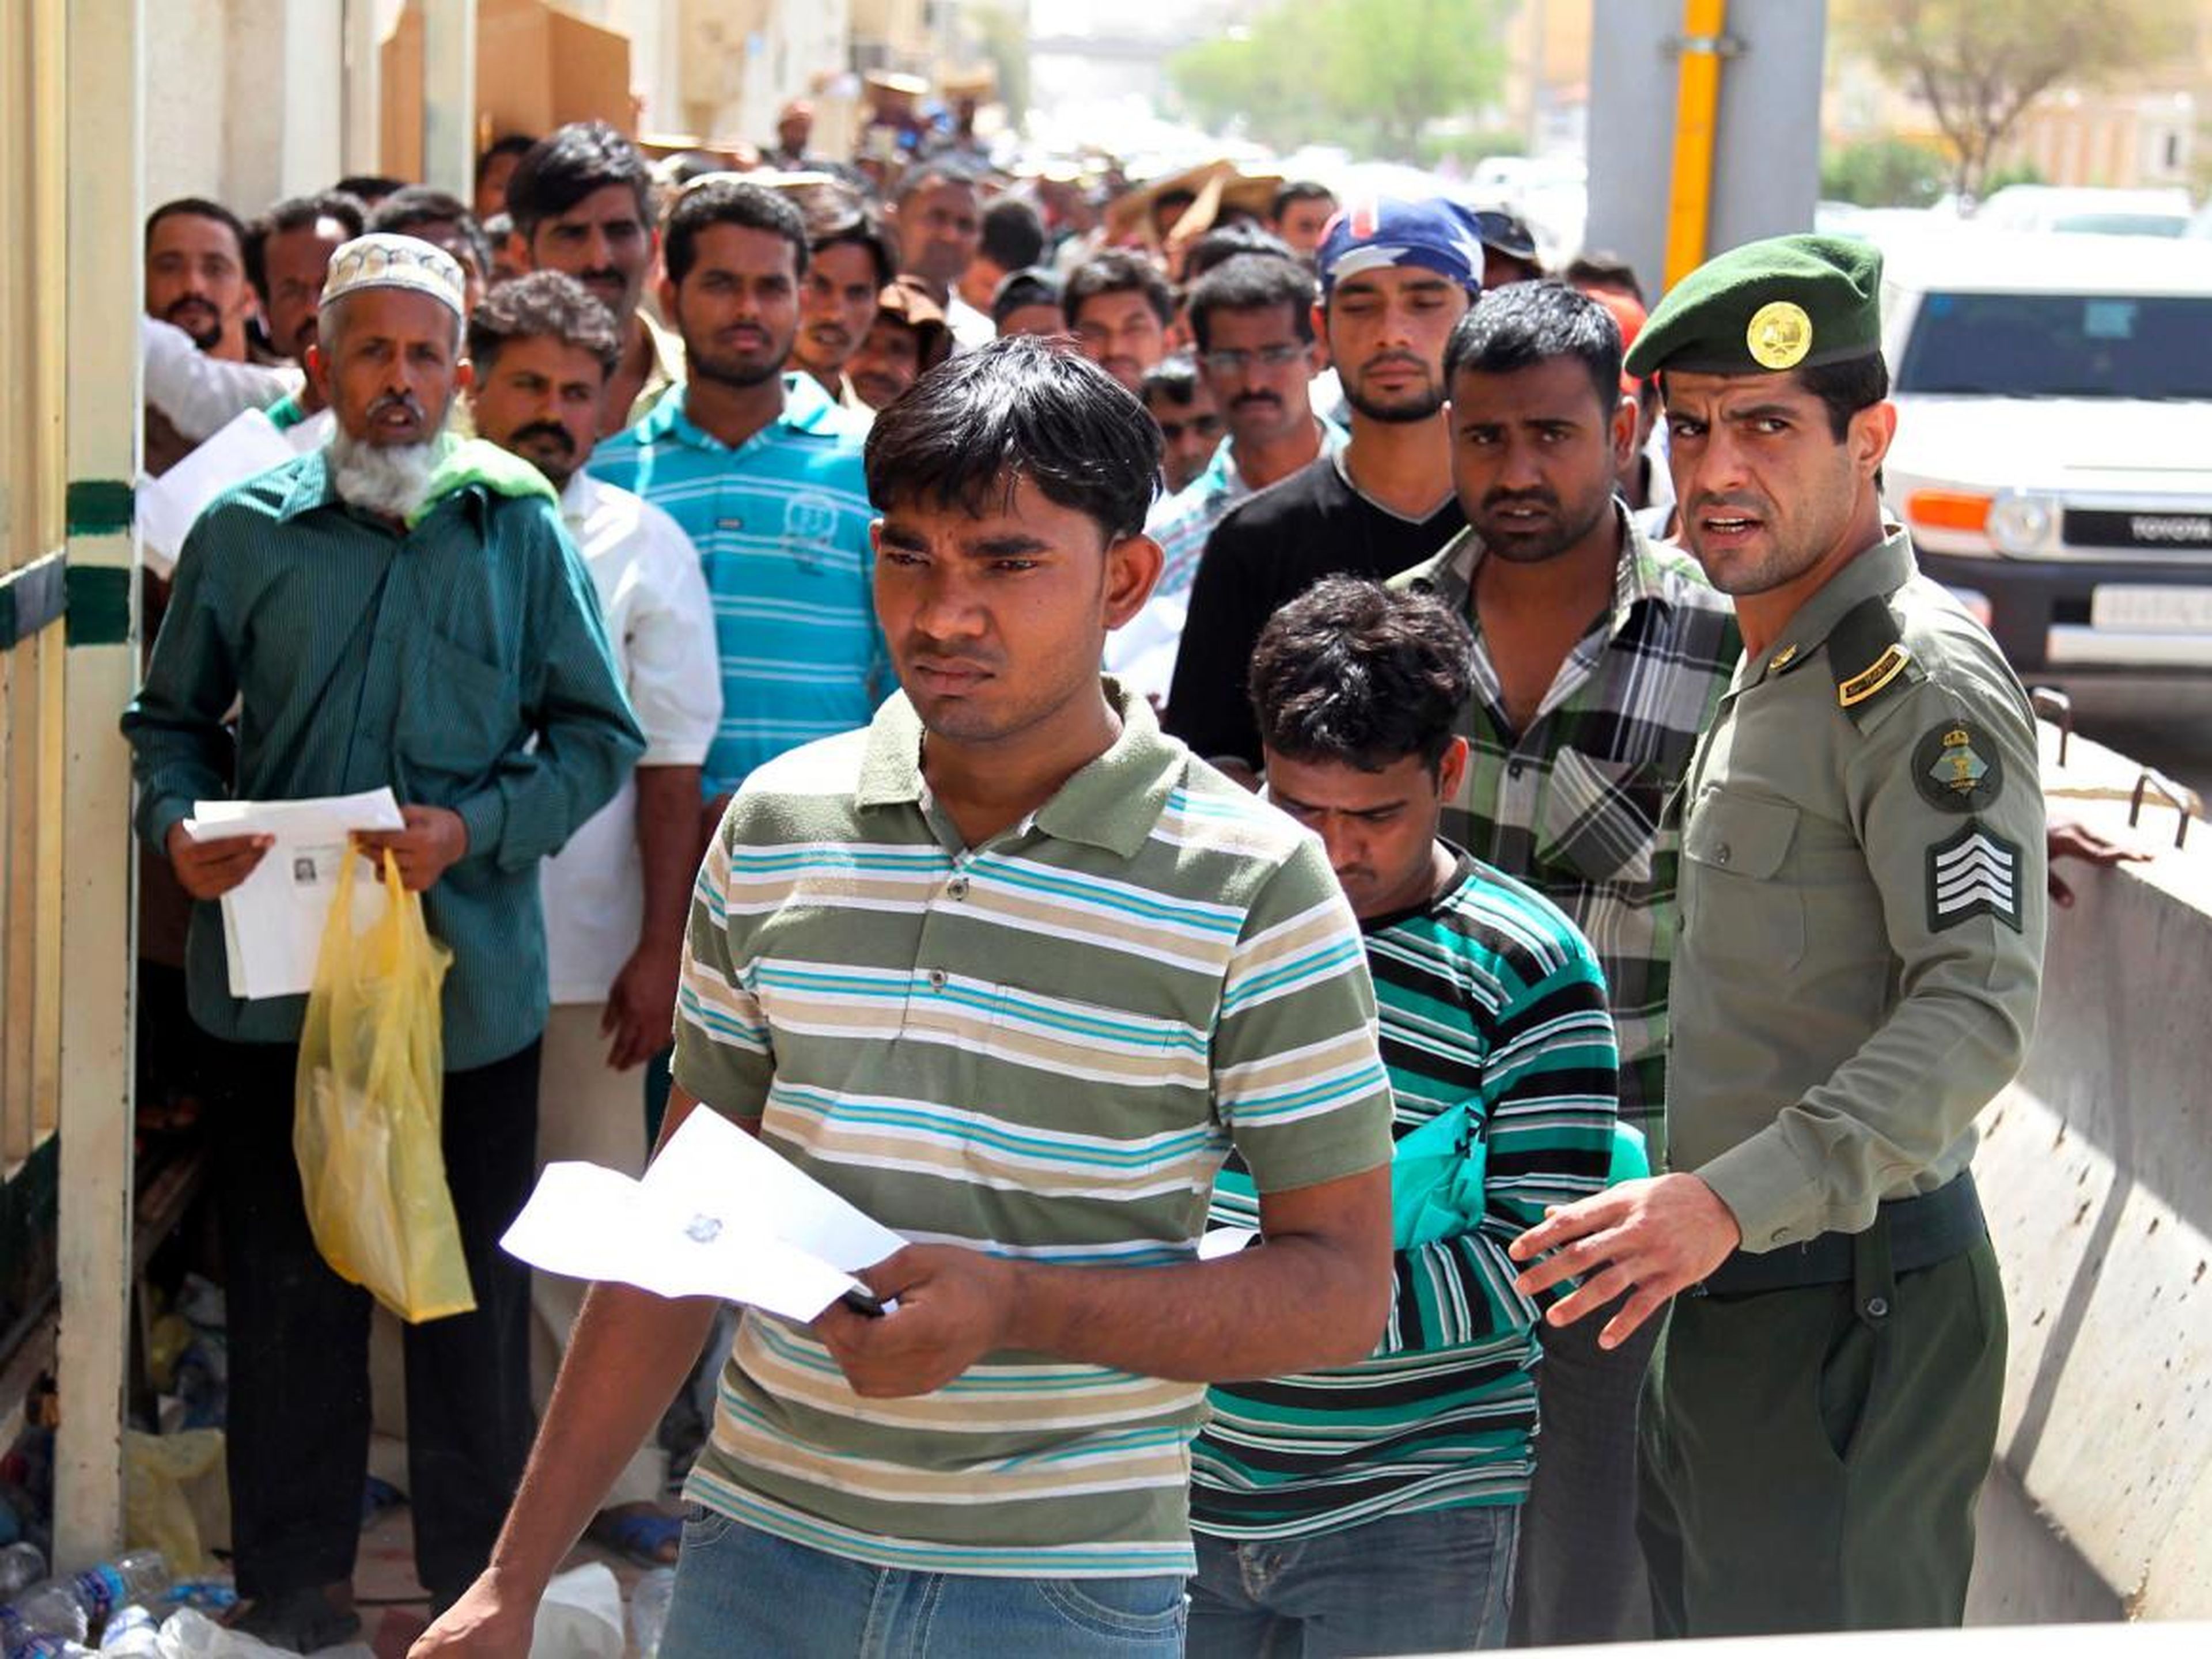 Saudi Arabia is dealing with severe unemployment.